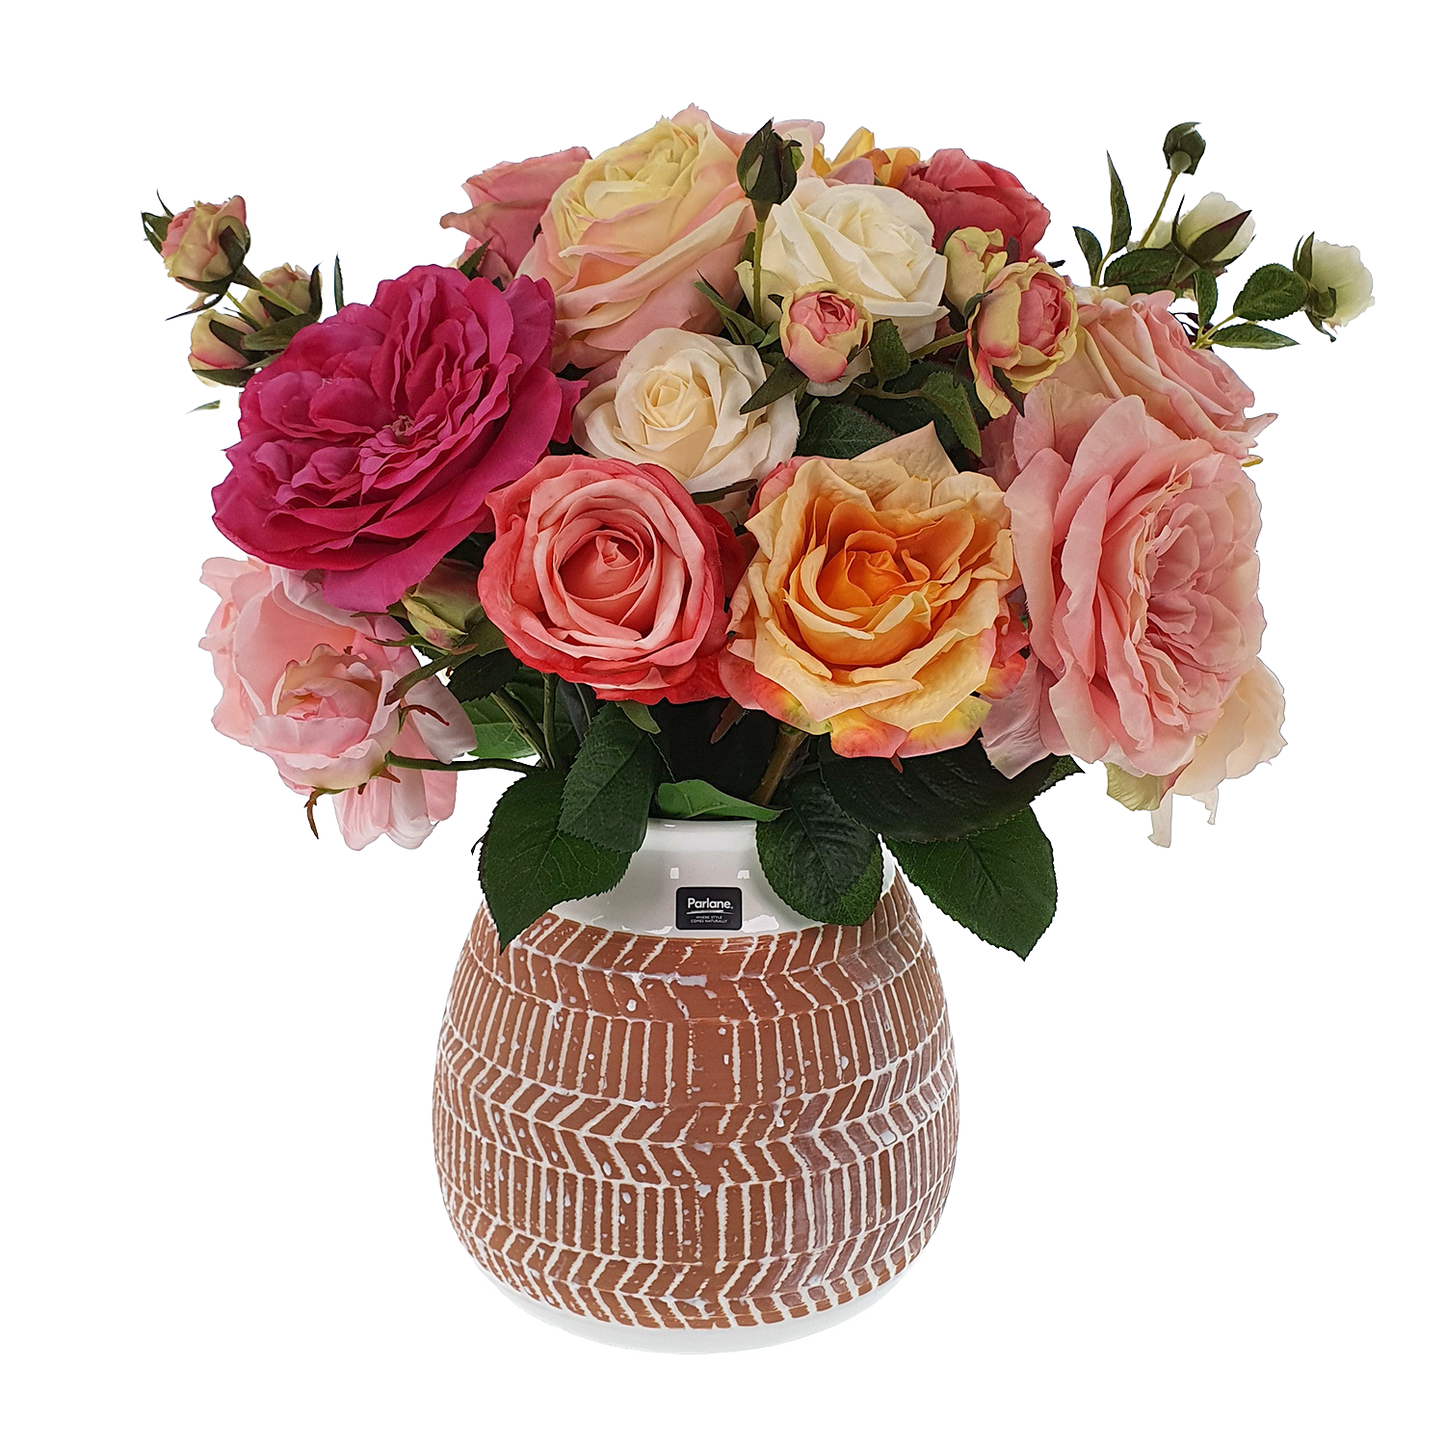 Viv! Home Luxuries Bouquet Rose Garden - including vase - peach pink yellow white - Top quality